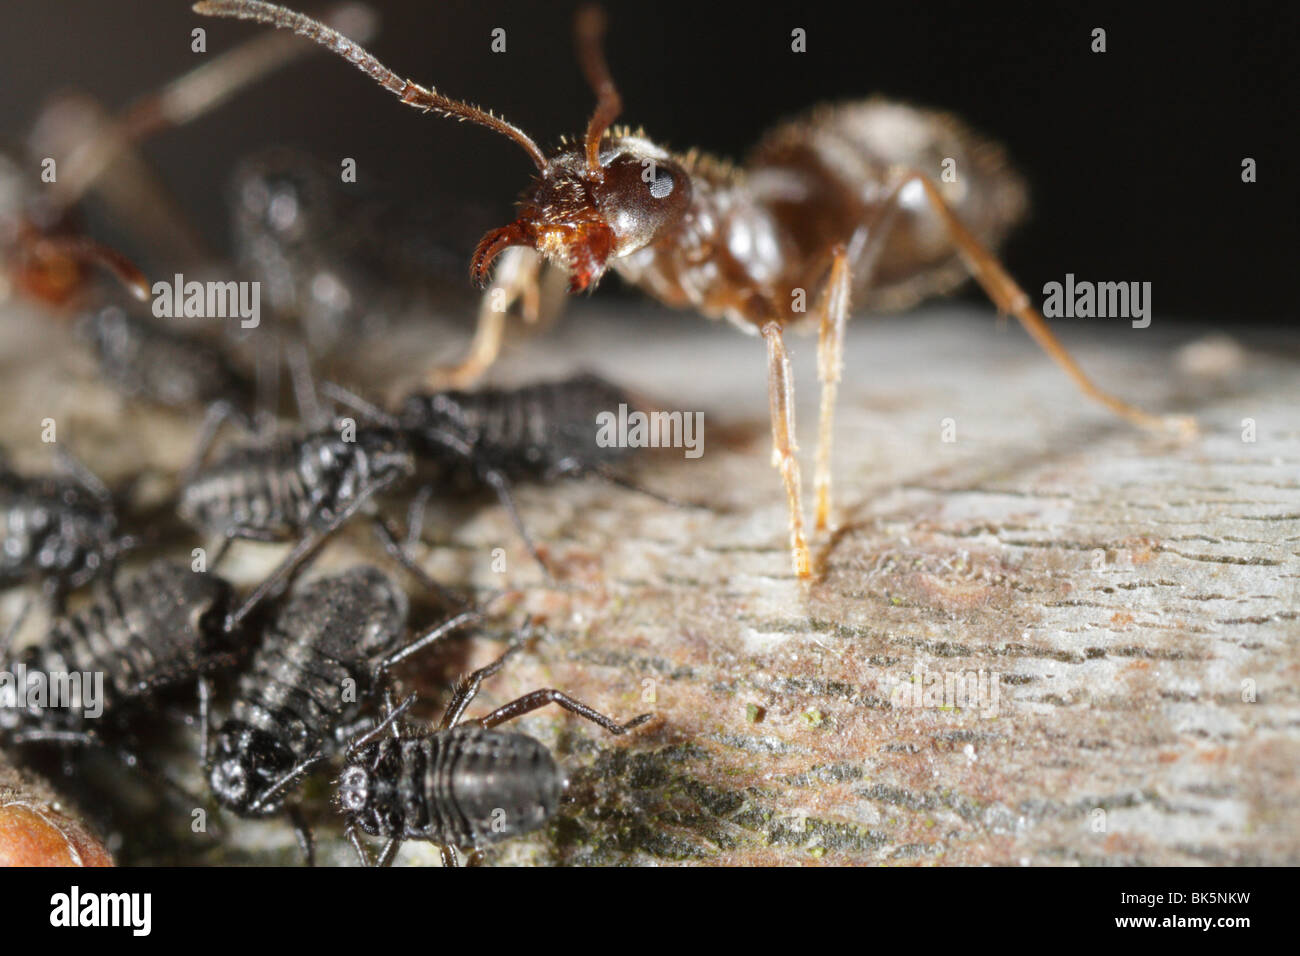 Ants (Lasius niger, Black Garden Ant) tending to aphids (Lachnus roboris) on an oak tree. The ant defends the aphids. Stock Photo